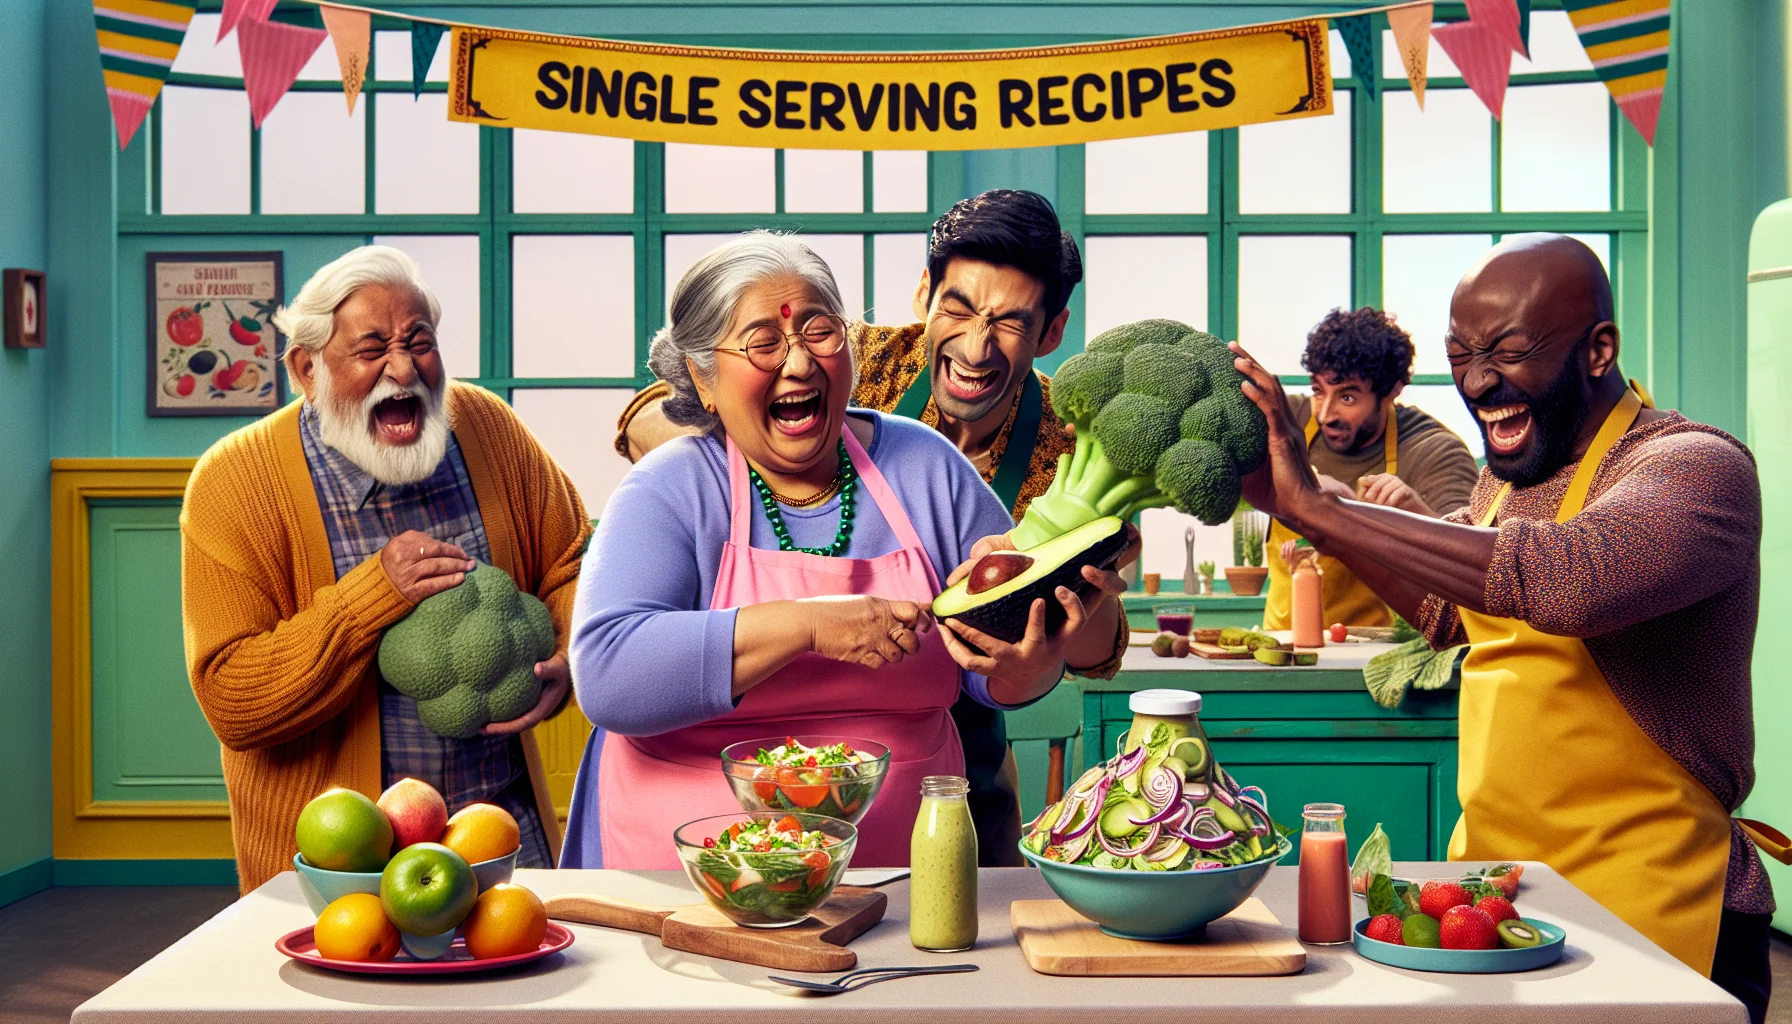 Visualize a humorous and realistic scenario prominently featuring healthy single serving recipes. In the centre, an elderly South Asian woman, brimming with fervour, details the ingredients of a vibrant salad she has concocted. To her left, an older Caucasian man is struggling to hold an oversized avocado, eliciting laughter from a Middle-Eastern woman who is preparing a smoothie from an array of colourful fruits. In the background, a Black man is humorously wrestling with a large head of broccoli. All of them are wearing bright aprons, the set is decorated in cheerful, pastel colours, and a banner that says 'Single Serving Recipes' hangs overhead.